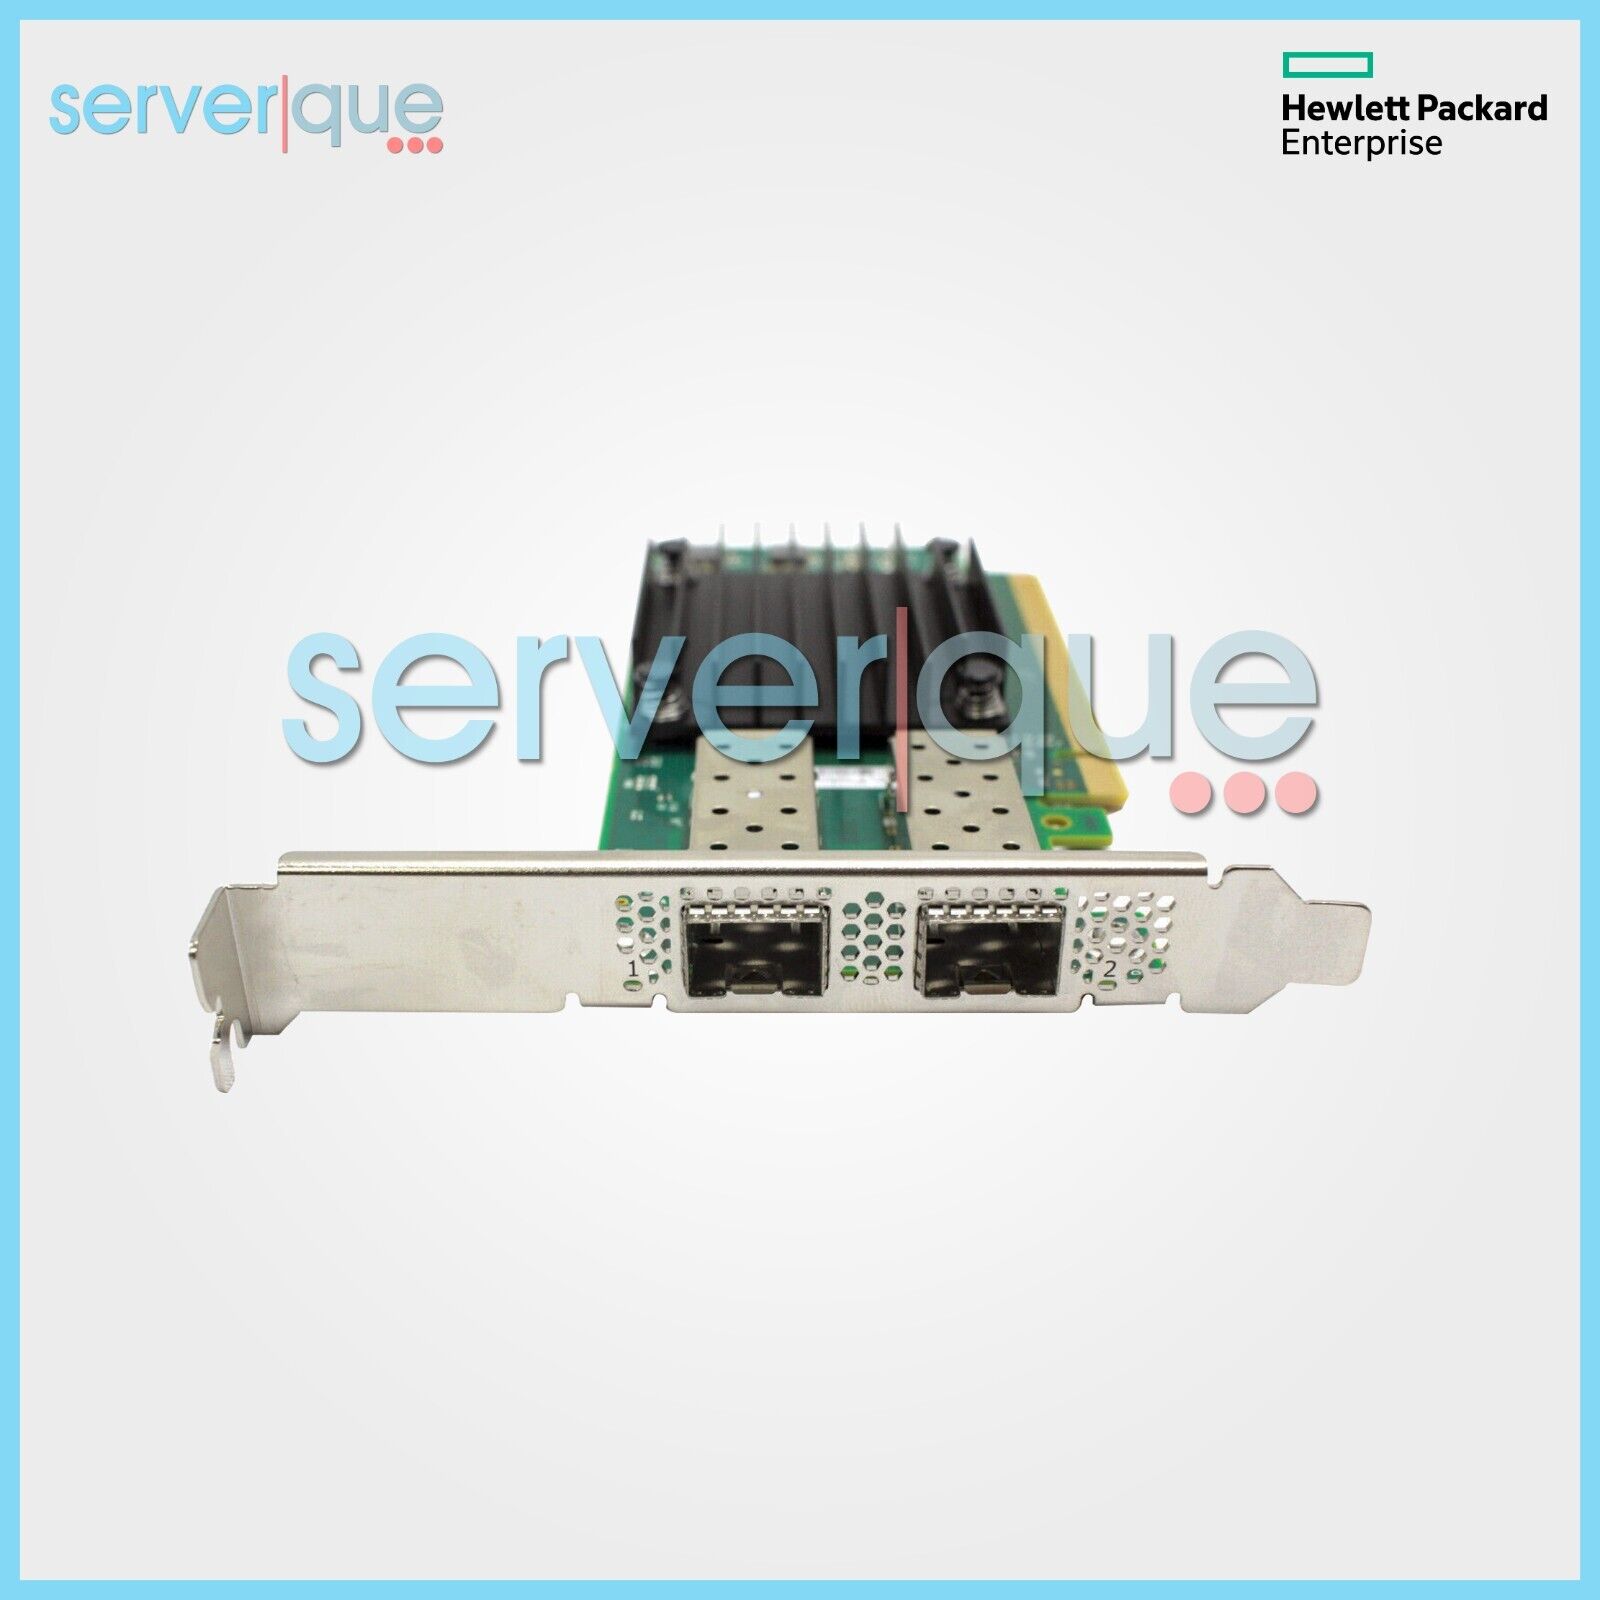 P10109-B21 HPE Ethernet 10/25Gbps Dual Port 641SFP28 Adapter P12608-001